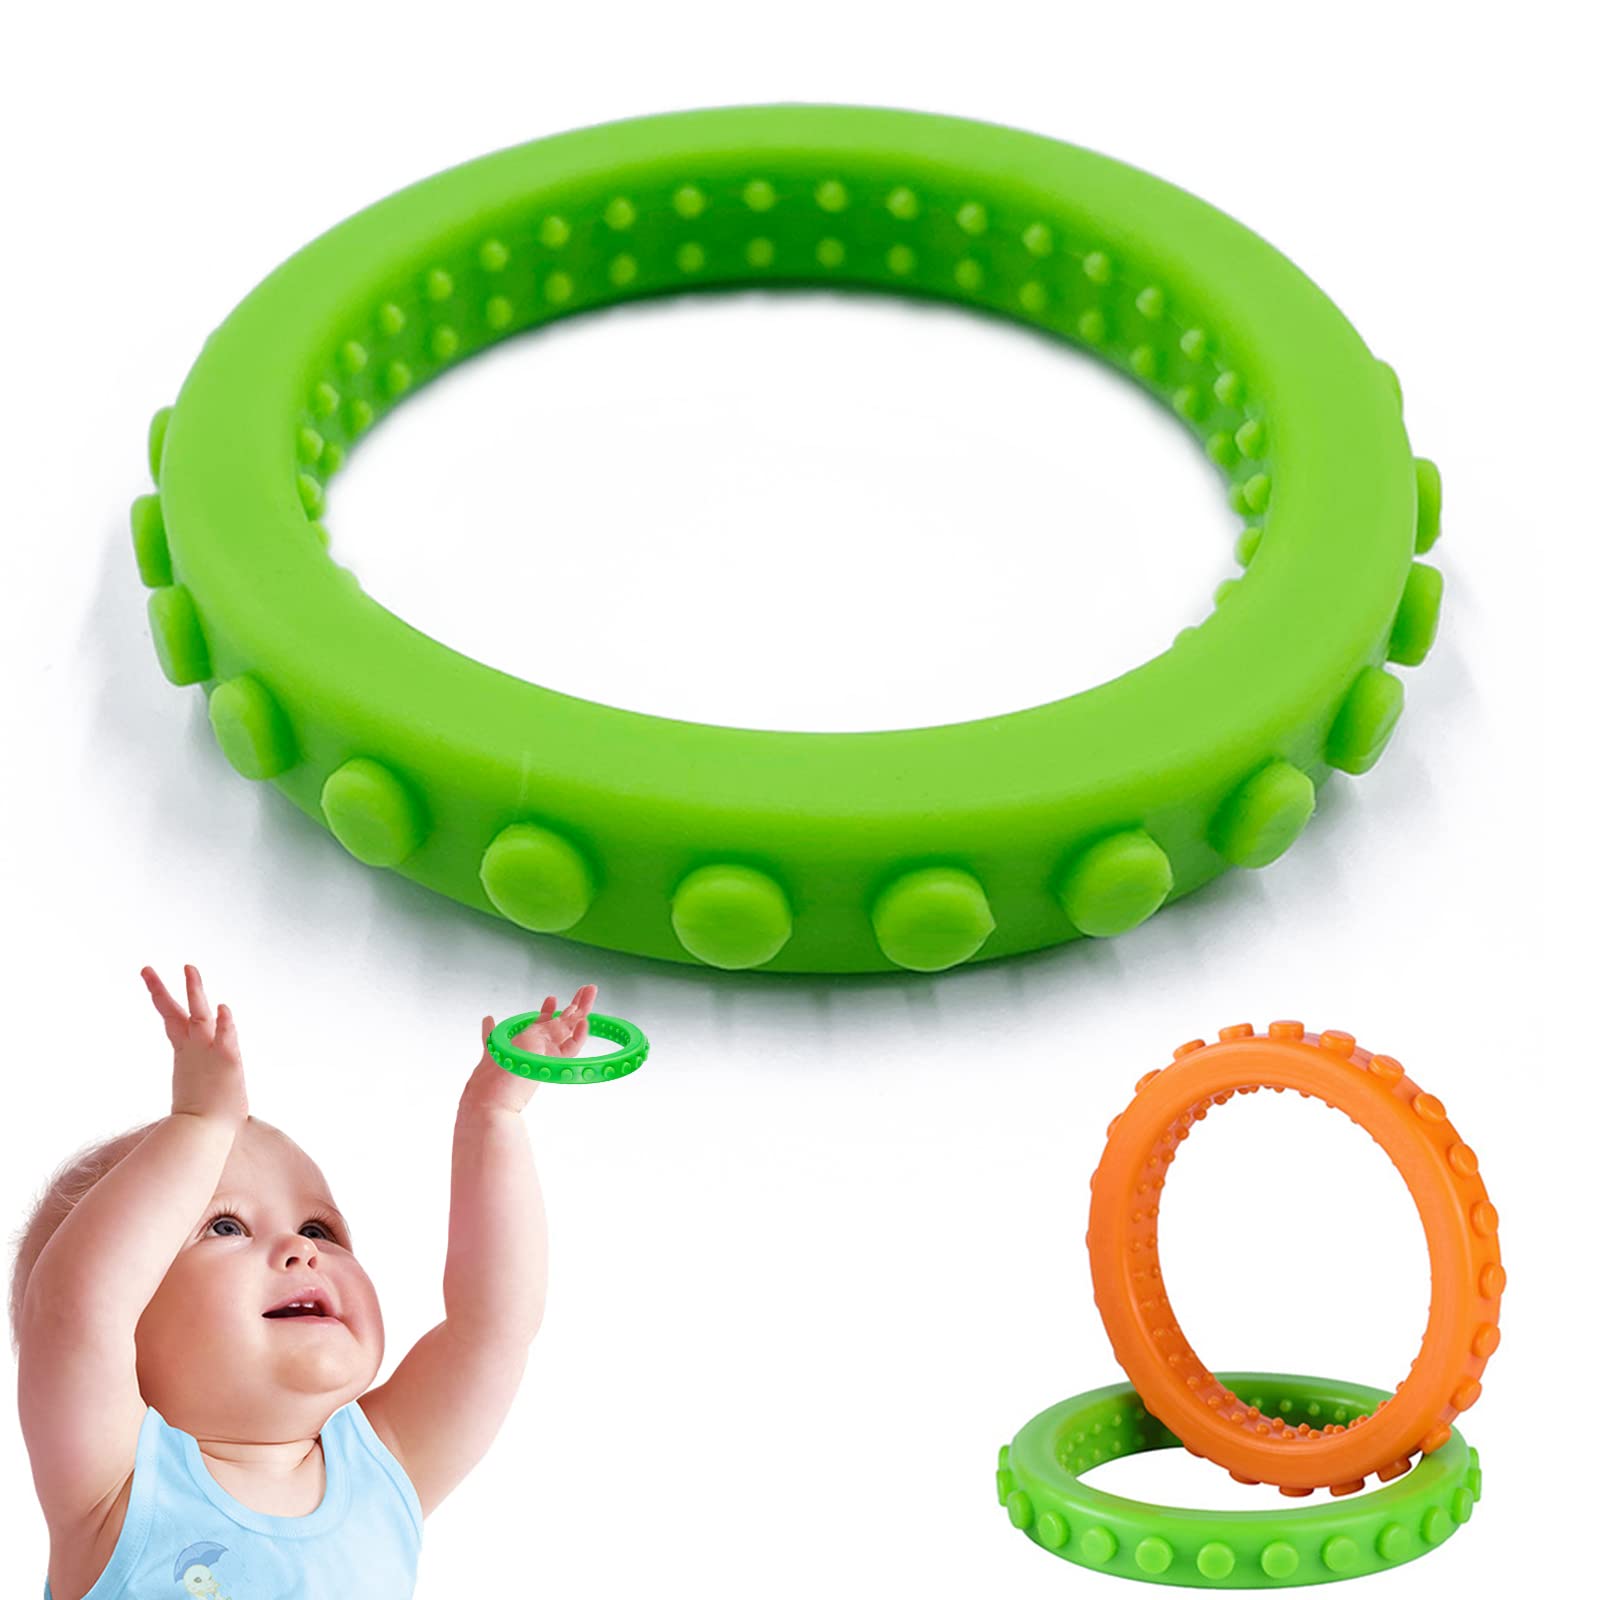 Sensory Chew Bracelet Teether for Kids Toddlers, Silicone Teething Ring BPA Free Autism Chewing Toy for Baby Boy Girl with ADHD, Teething, Anxiety, Biting Needs, Oral Sensory Motor Aids…